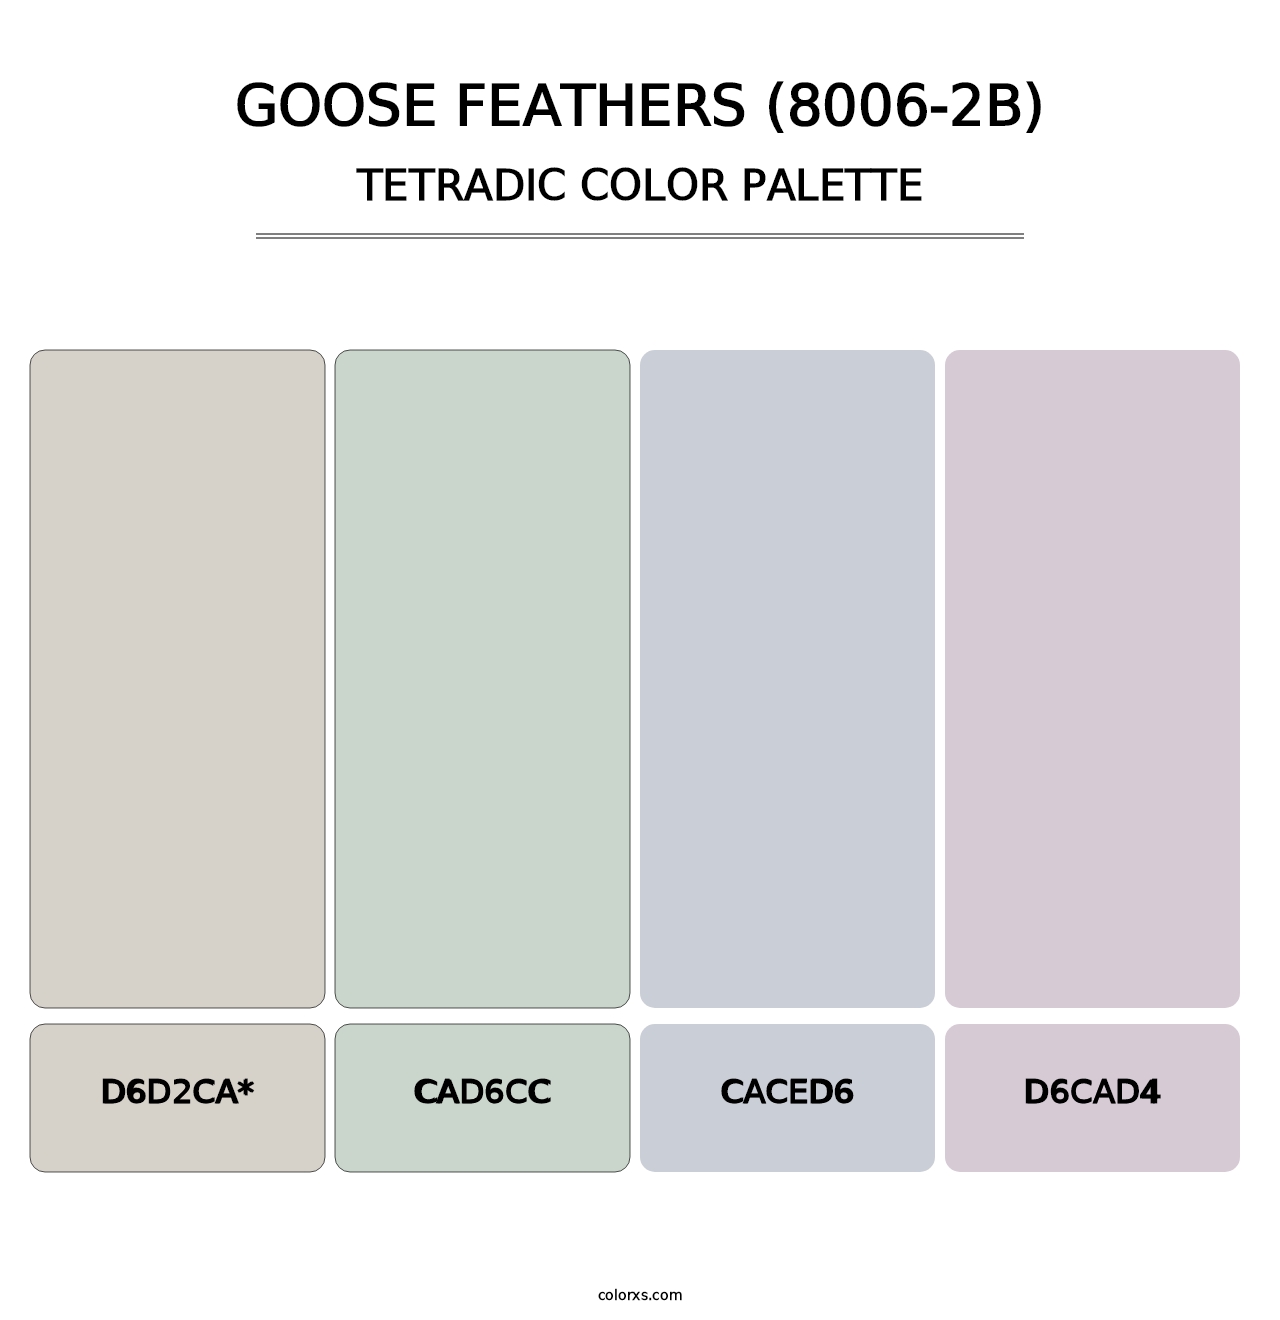 Goose Feathers (8006-2B) - Tetradic Color Palette